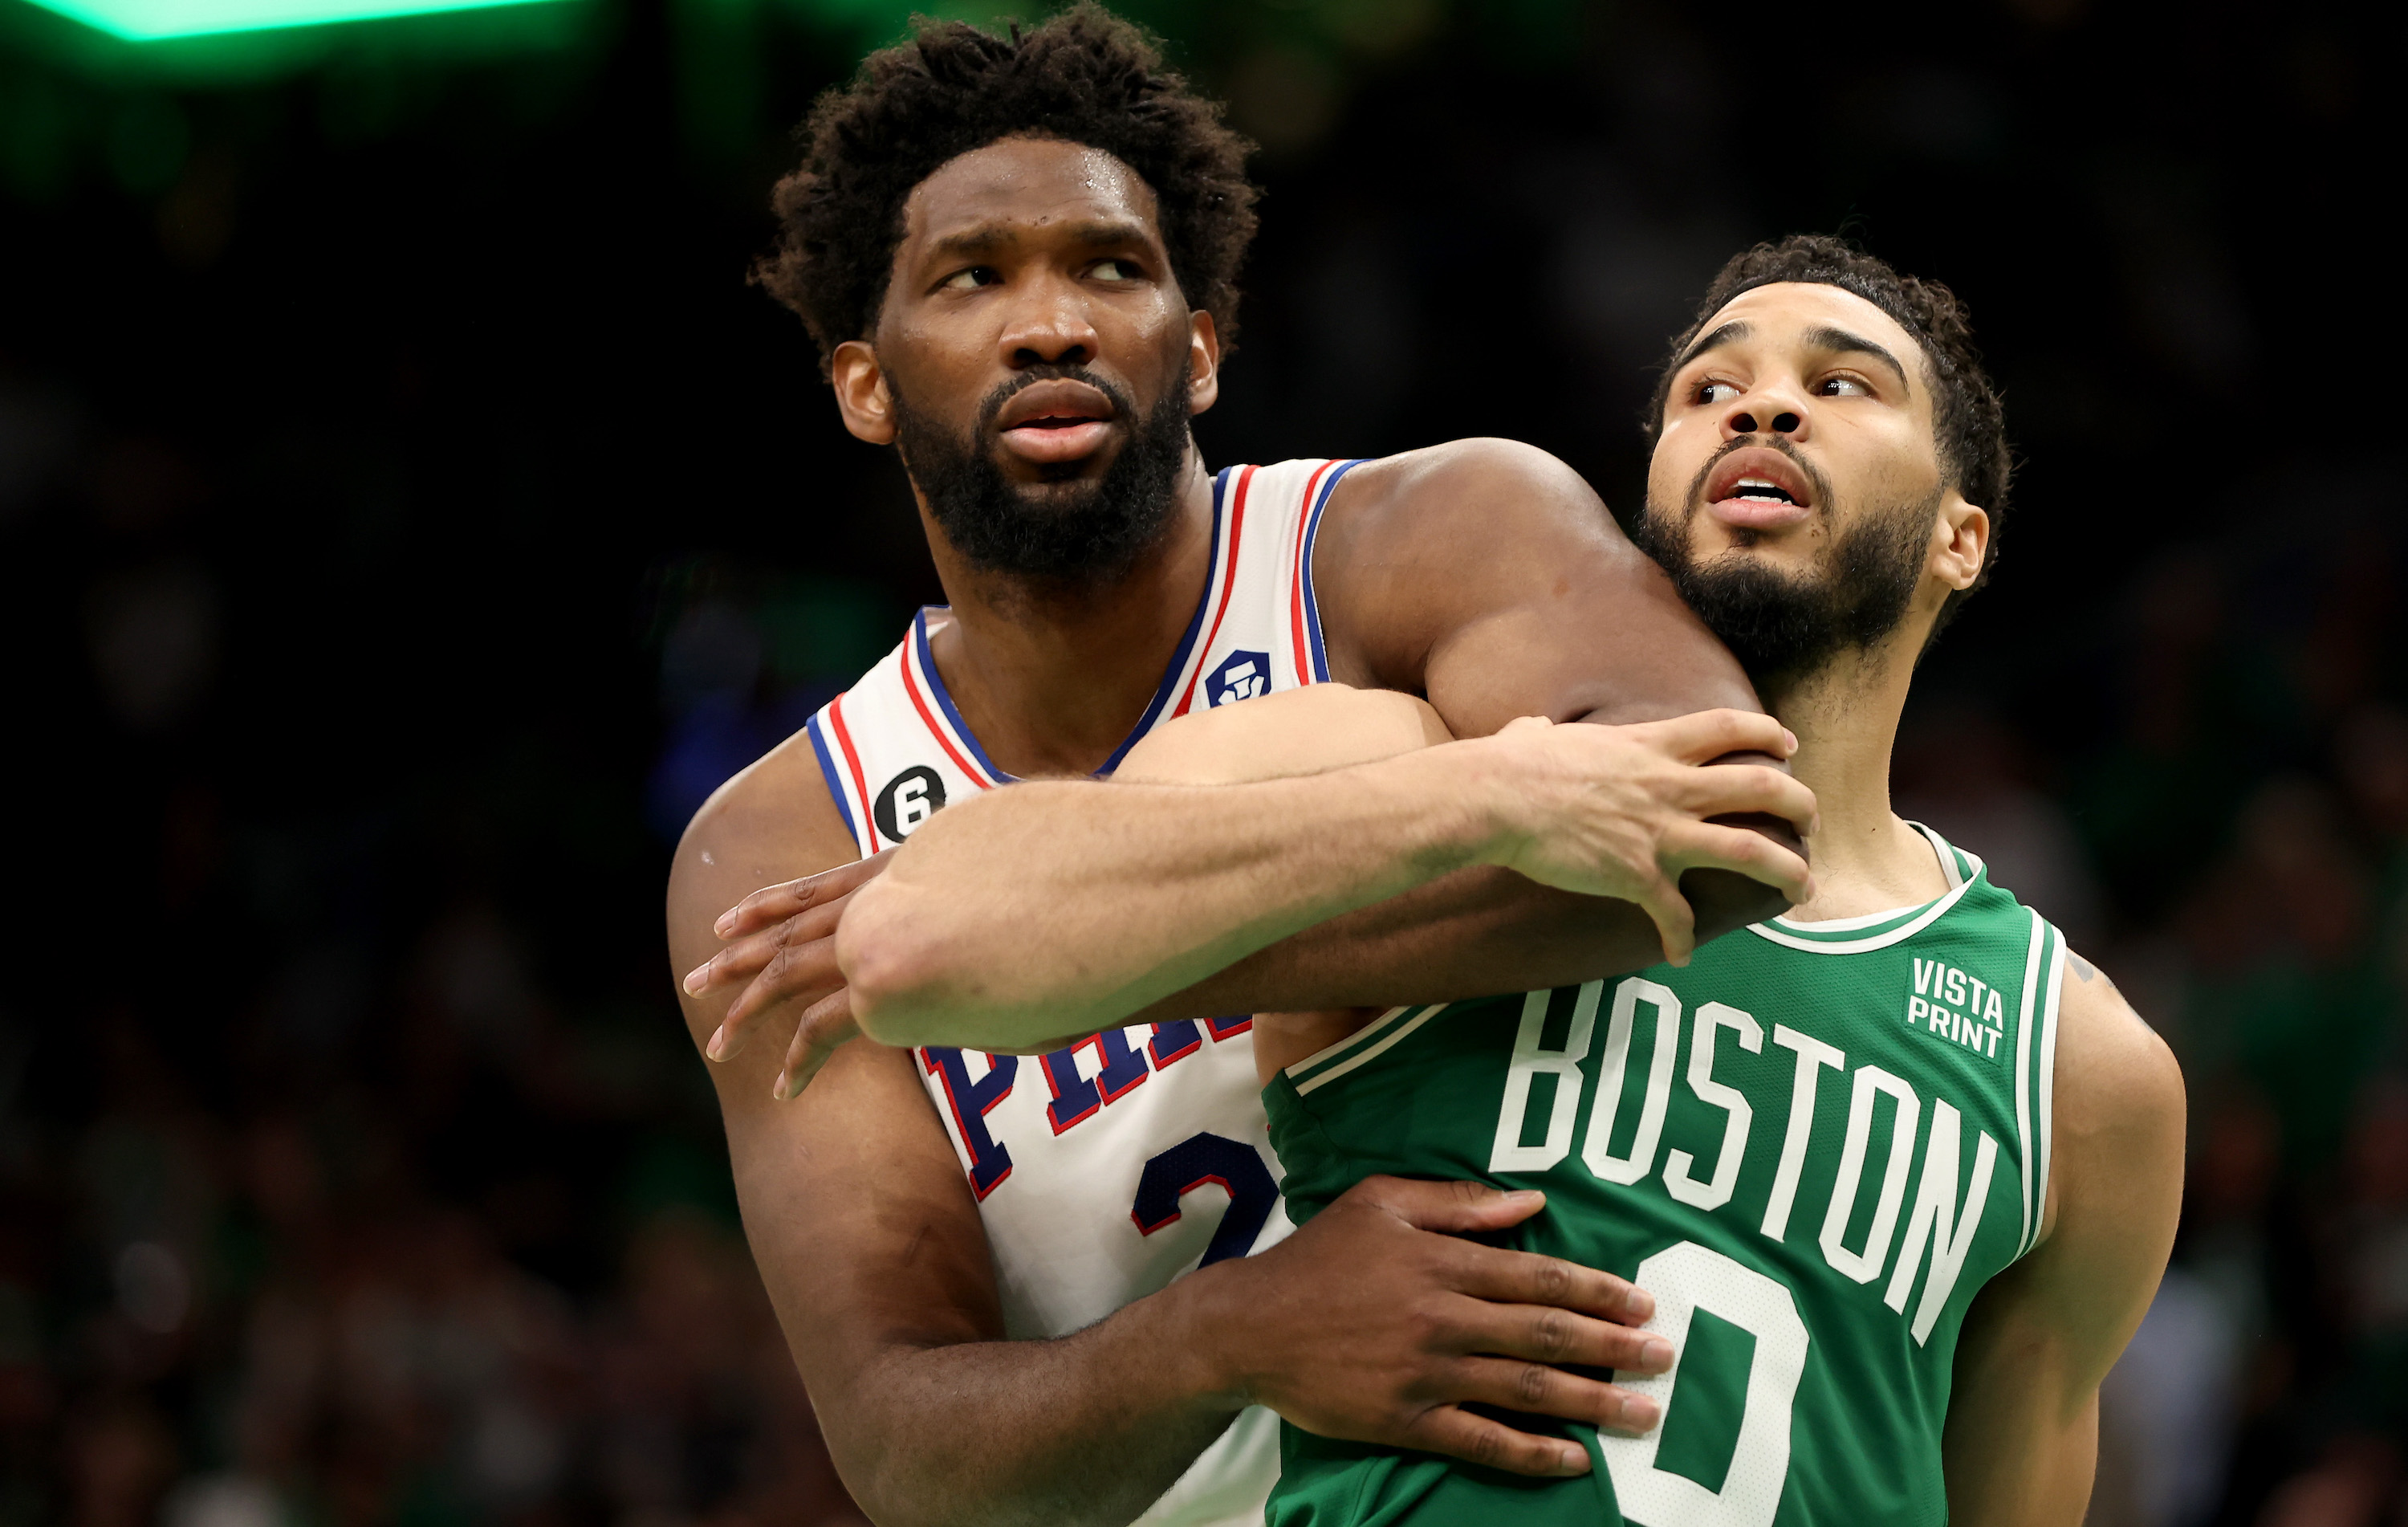 BOSTON, MASSACHUSETTS - MAY 14: Jayson Tatum #0 of the Boston Celtics collides with Joel Embiid #21 of the Philadelphia 76ers during the fourth quarter in game seven of the 2023 NBA Playoffs Eastern Conference Semifinals at TD Garden on May 14, 2023 in Boston, Massachusetts. NOTE TO USER: User expressly acknowledges and agrees that, by downloading and or using this photograph, User is consenting to the terms and conditions of the Getty Images License Agreement. (Photo by Adam Glanzman/Getty Images)